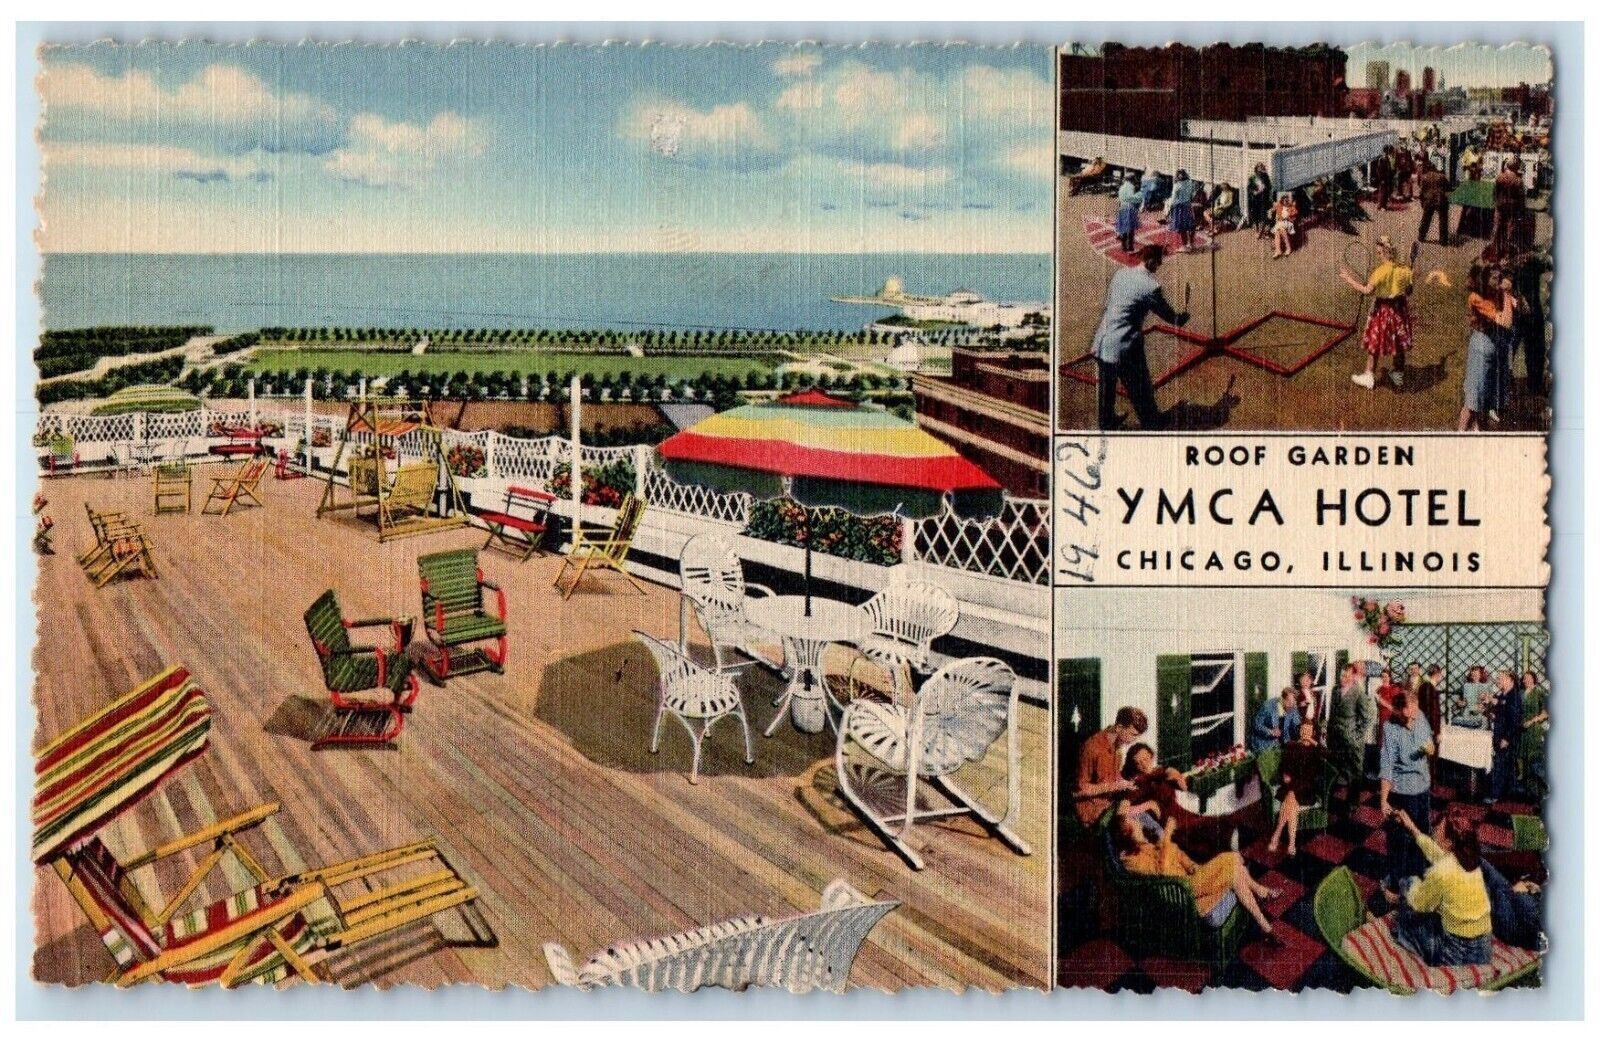 YMCA Hotel Roof Garden Chicago Illinois IL, Multiview Unposted Vintage Postcard